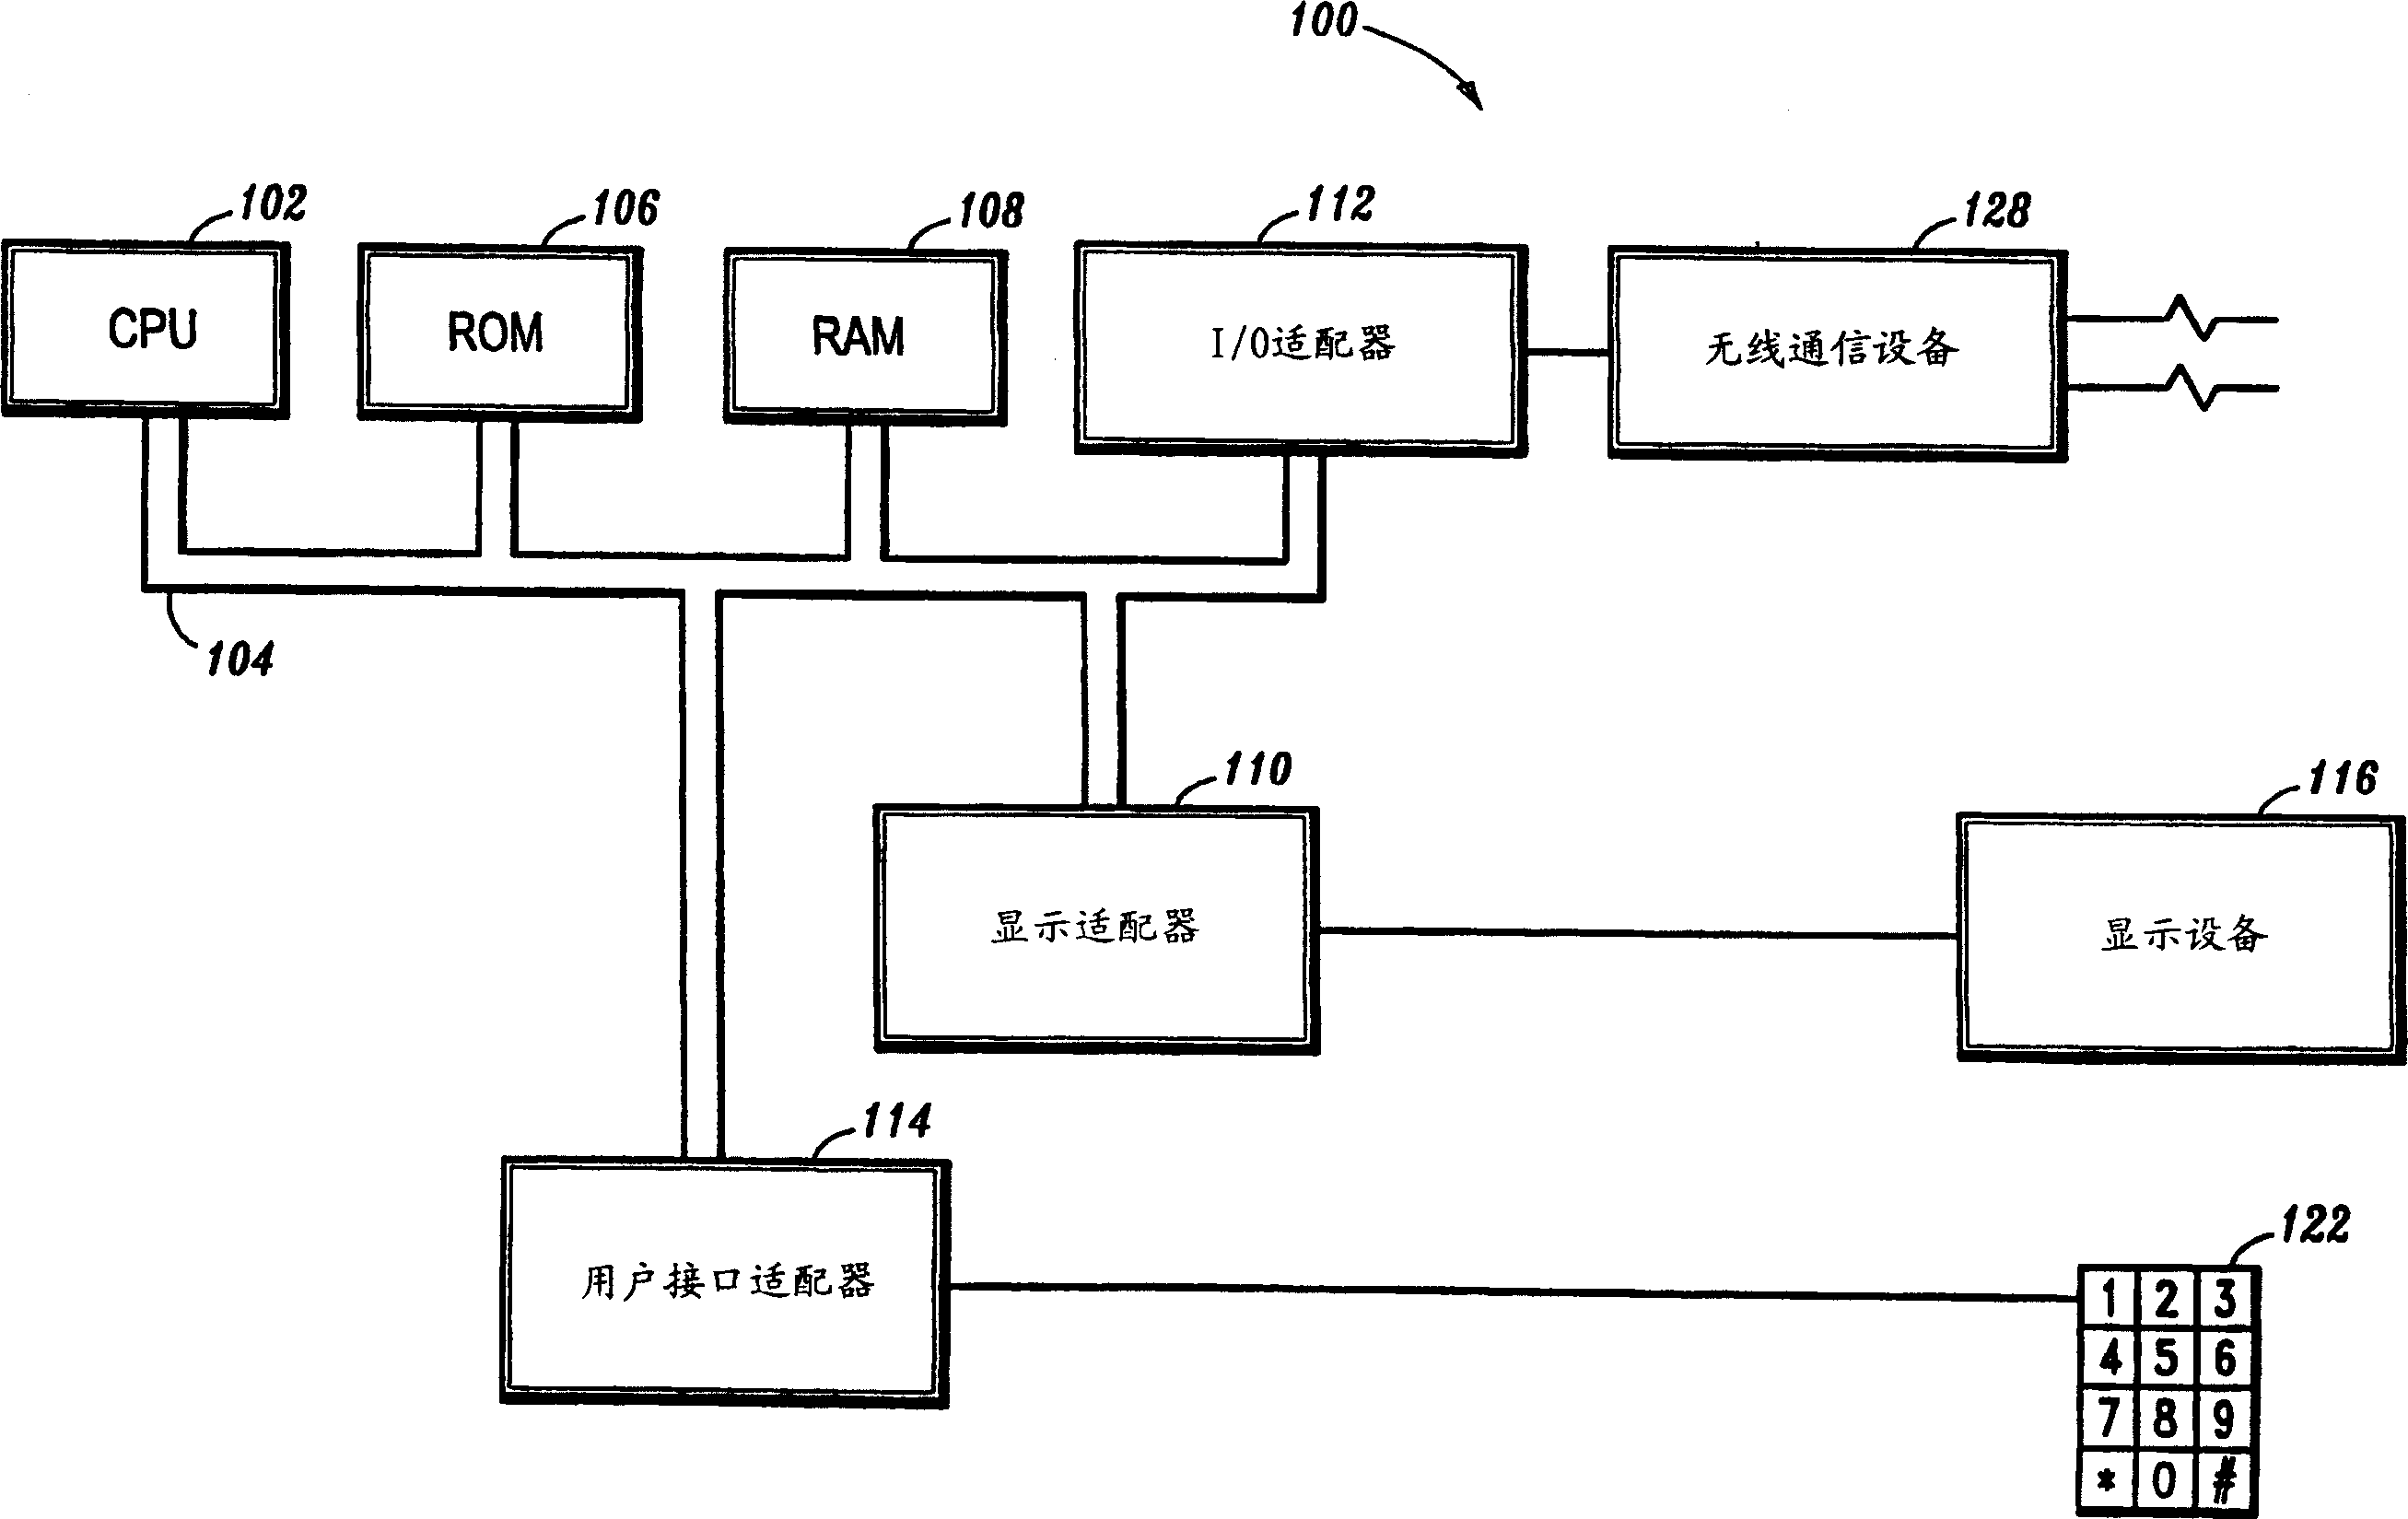 Mechanism for a wireless device to relinquish its network master status based on its power reserve